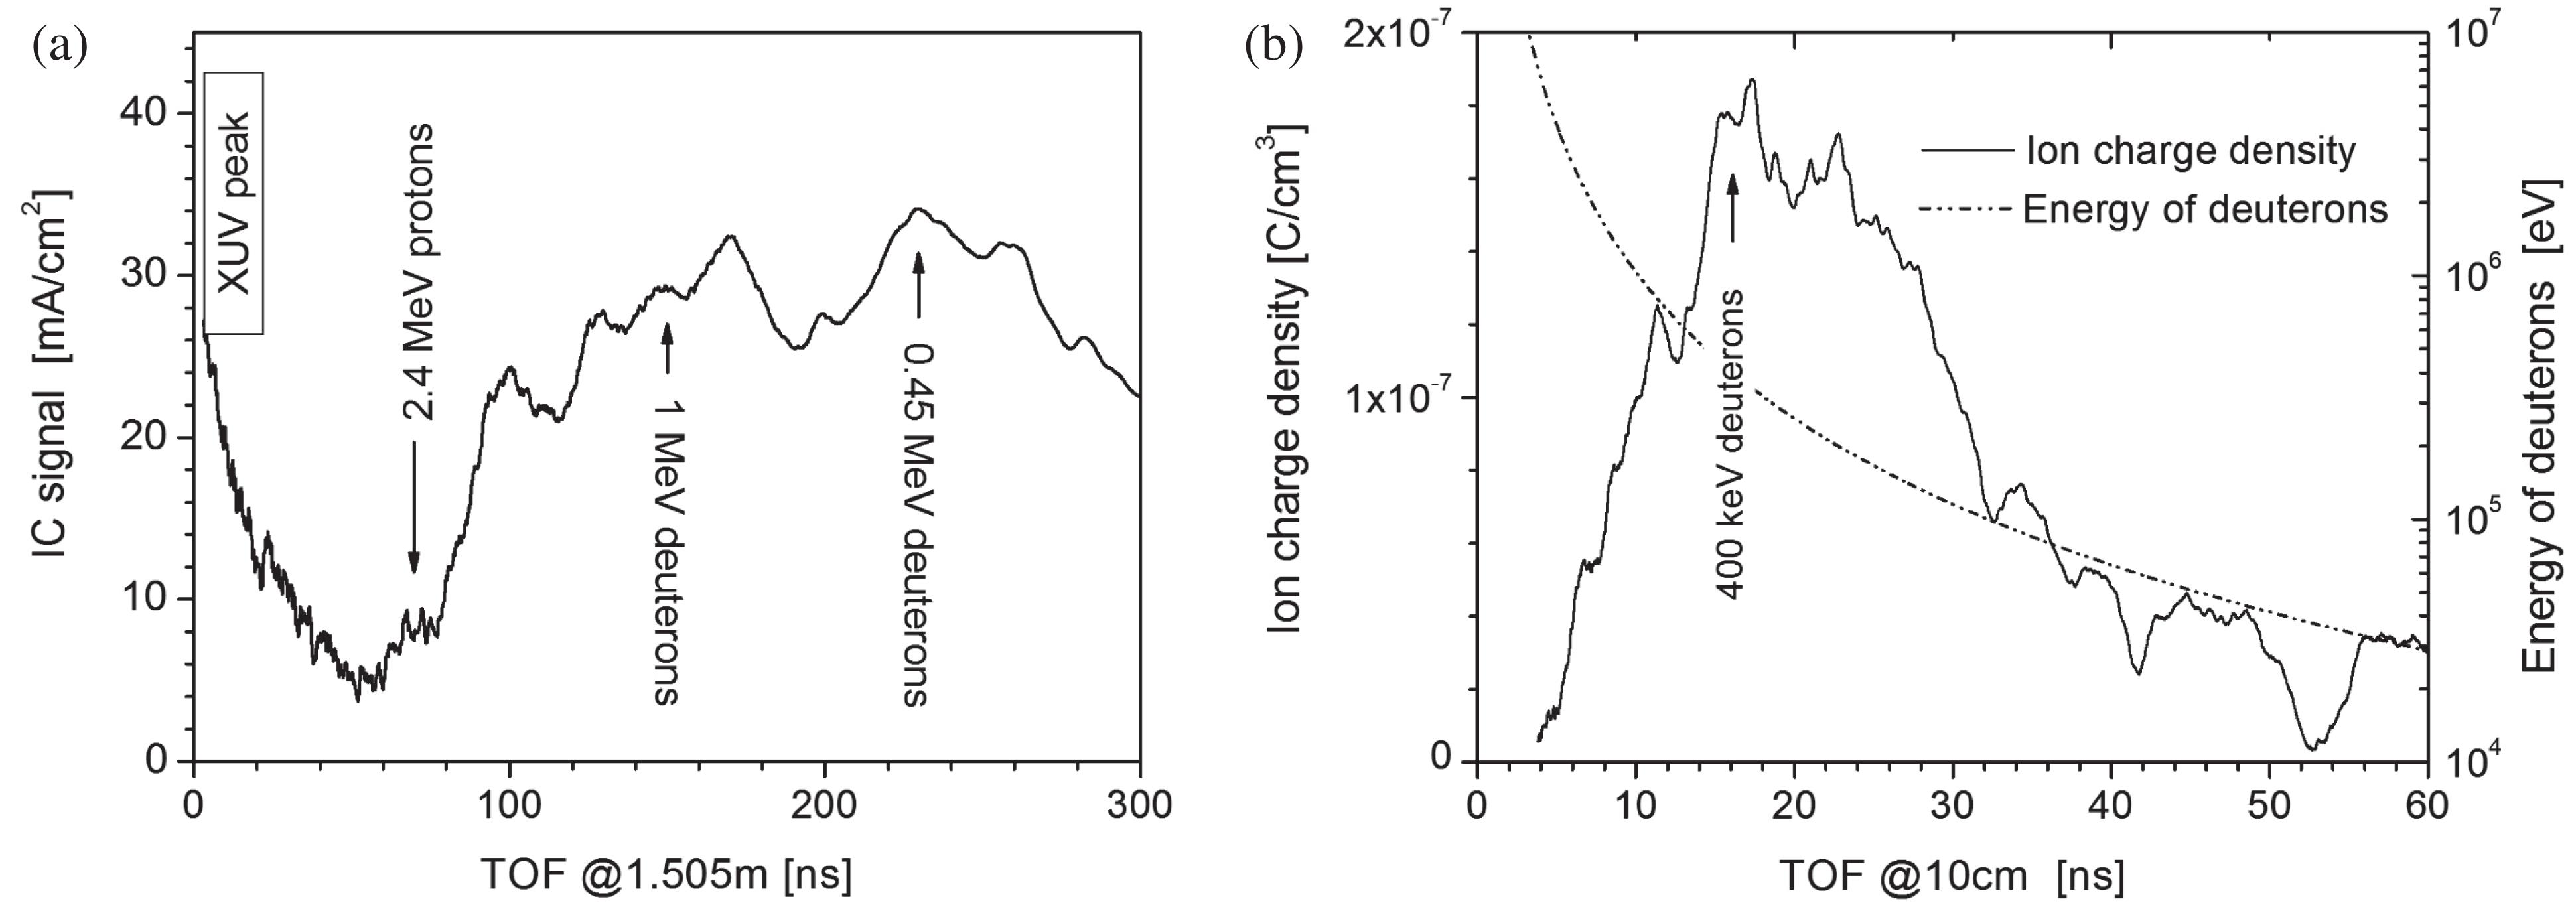 (a) Typical time-resolved ion current density observed using an IC positioned at a distance of 1.5 m from a massive target in a backward direction at with respect to the laser vector. The first peak was induced by XUV radiation. The peak at 70 ns was induced by 2.4 MeV protons. (b) Charge density of ions impacting on a secondary target at a distance of 10 cm for the primary target, which was derived from the IC signal using the relationship (2). The dashed line shows the energy of deuterons. The laser irradiance on target was .